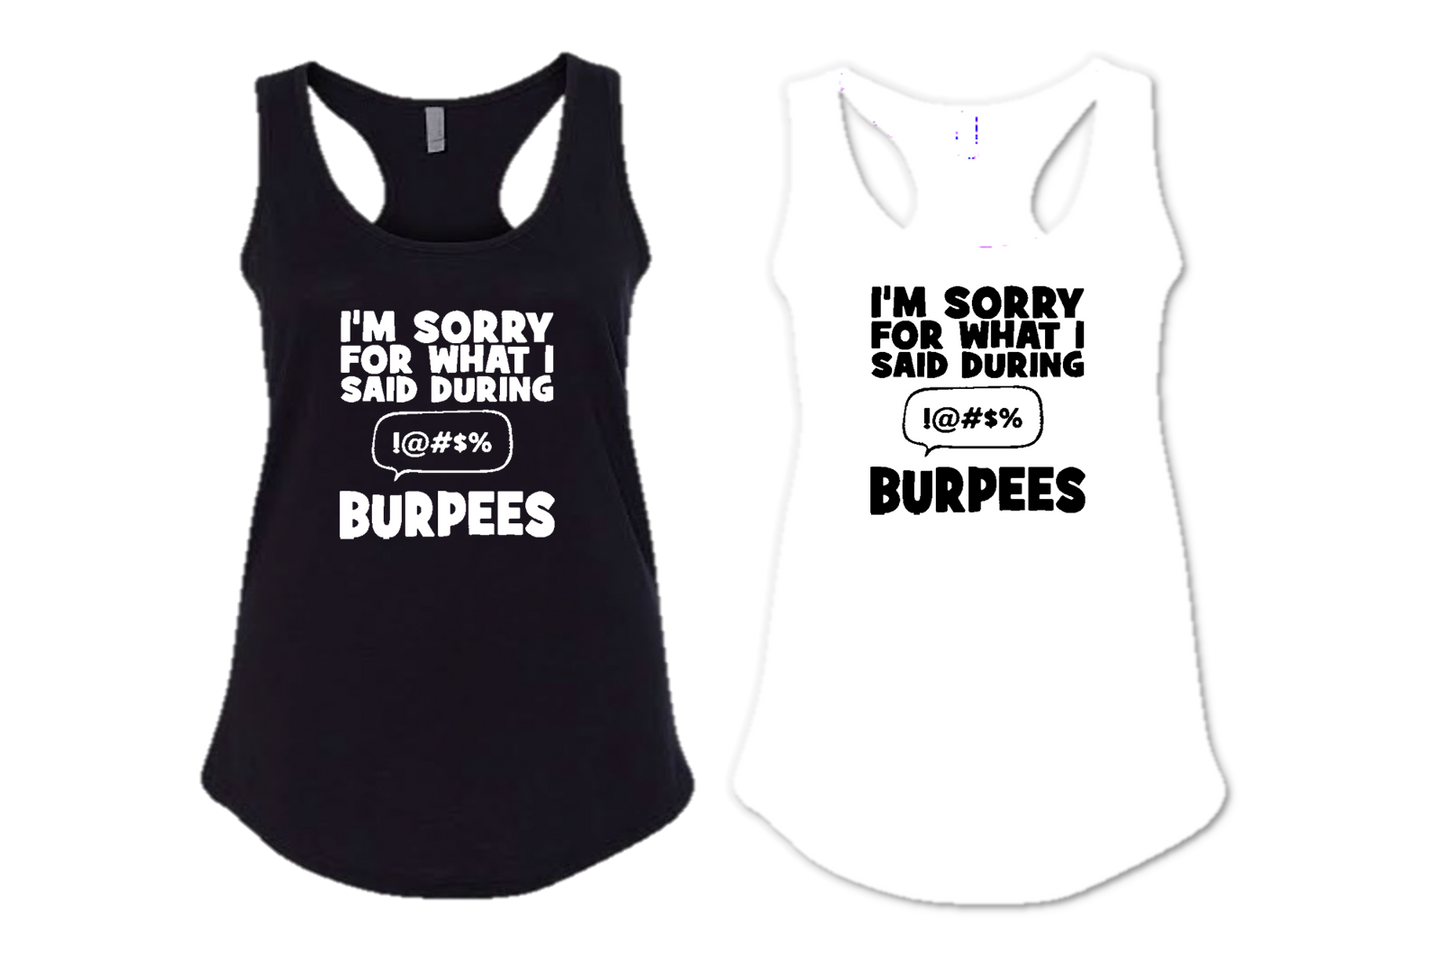 I'M SORRY FOR WHAT I SAID DURING BURPEES